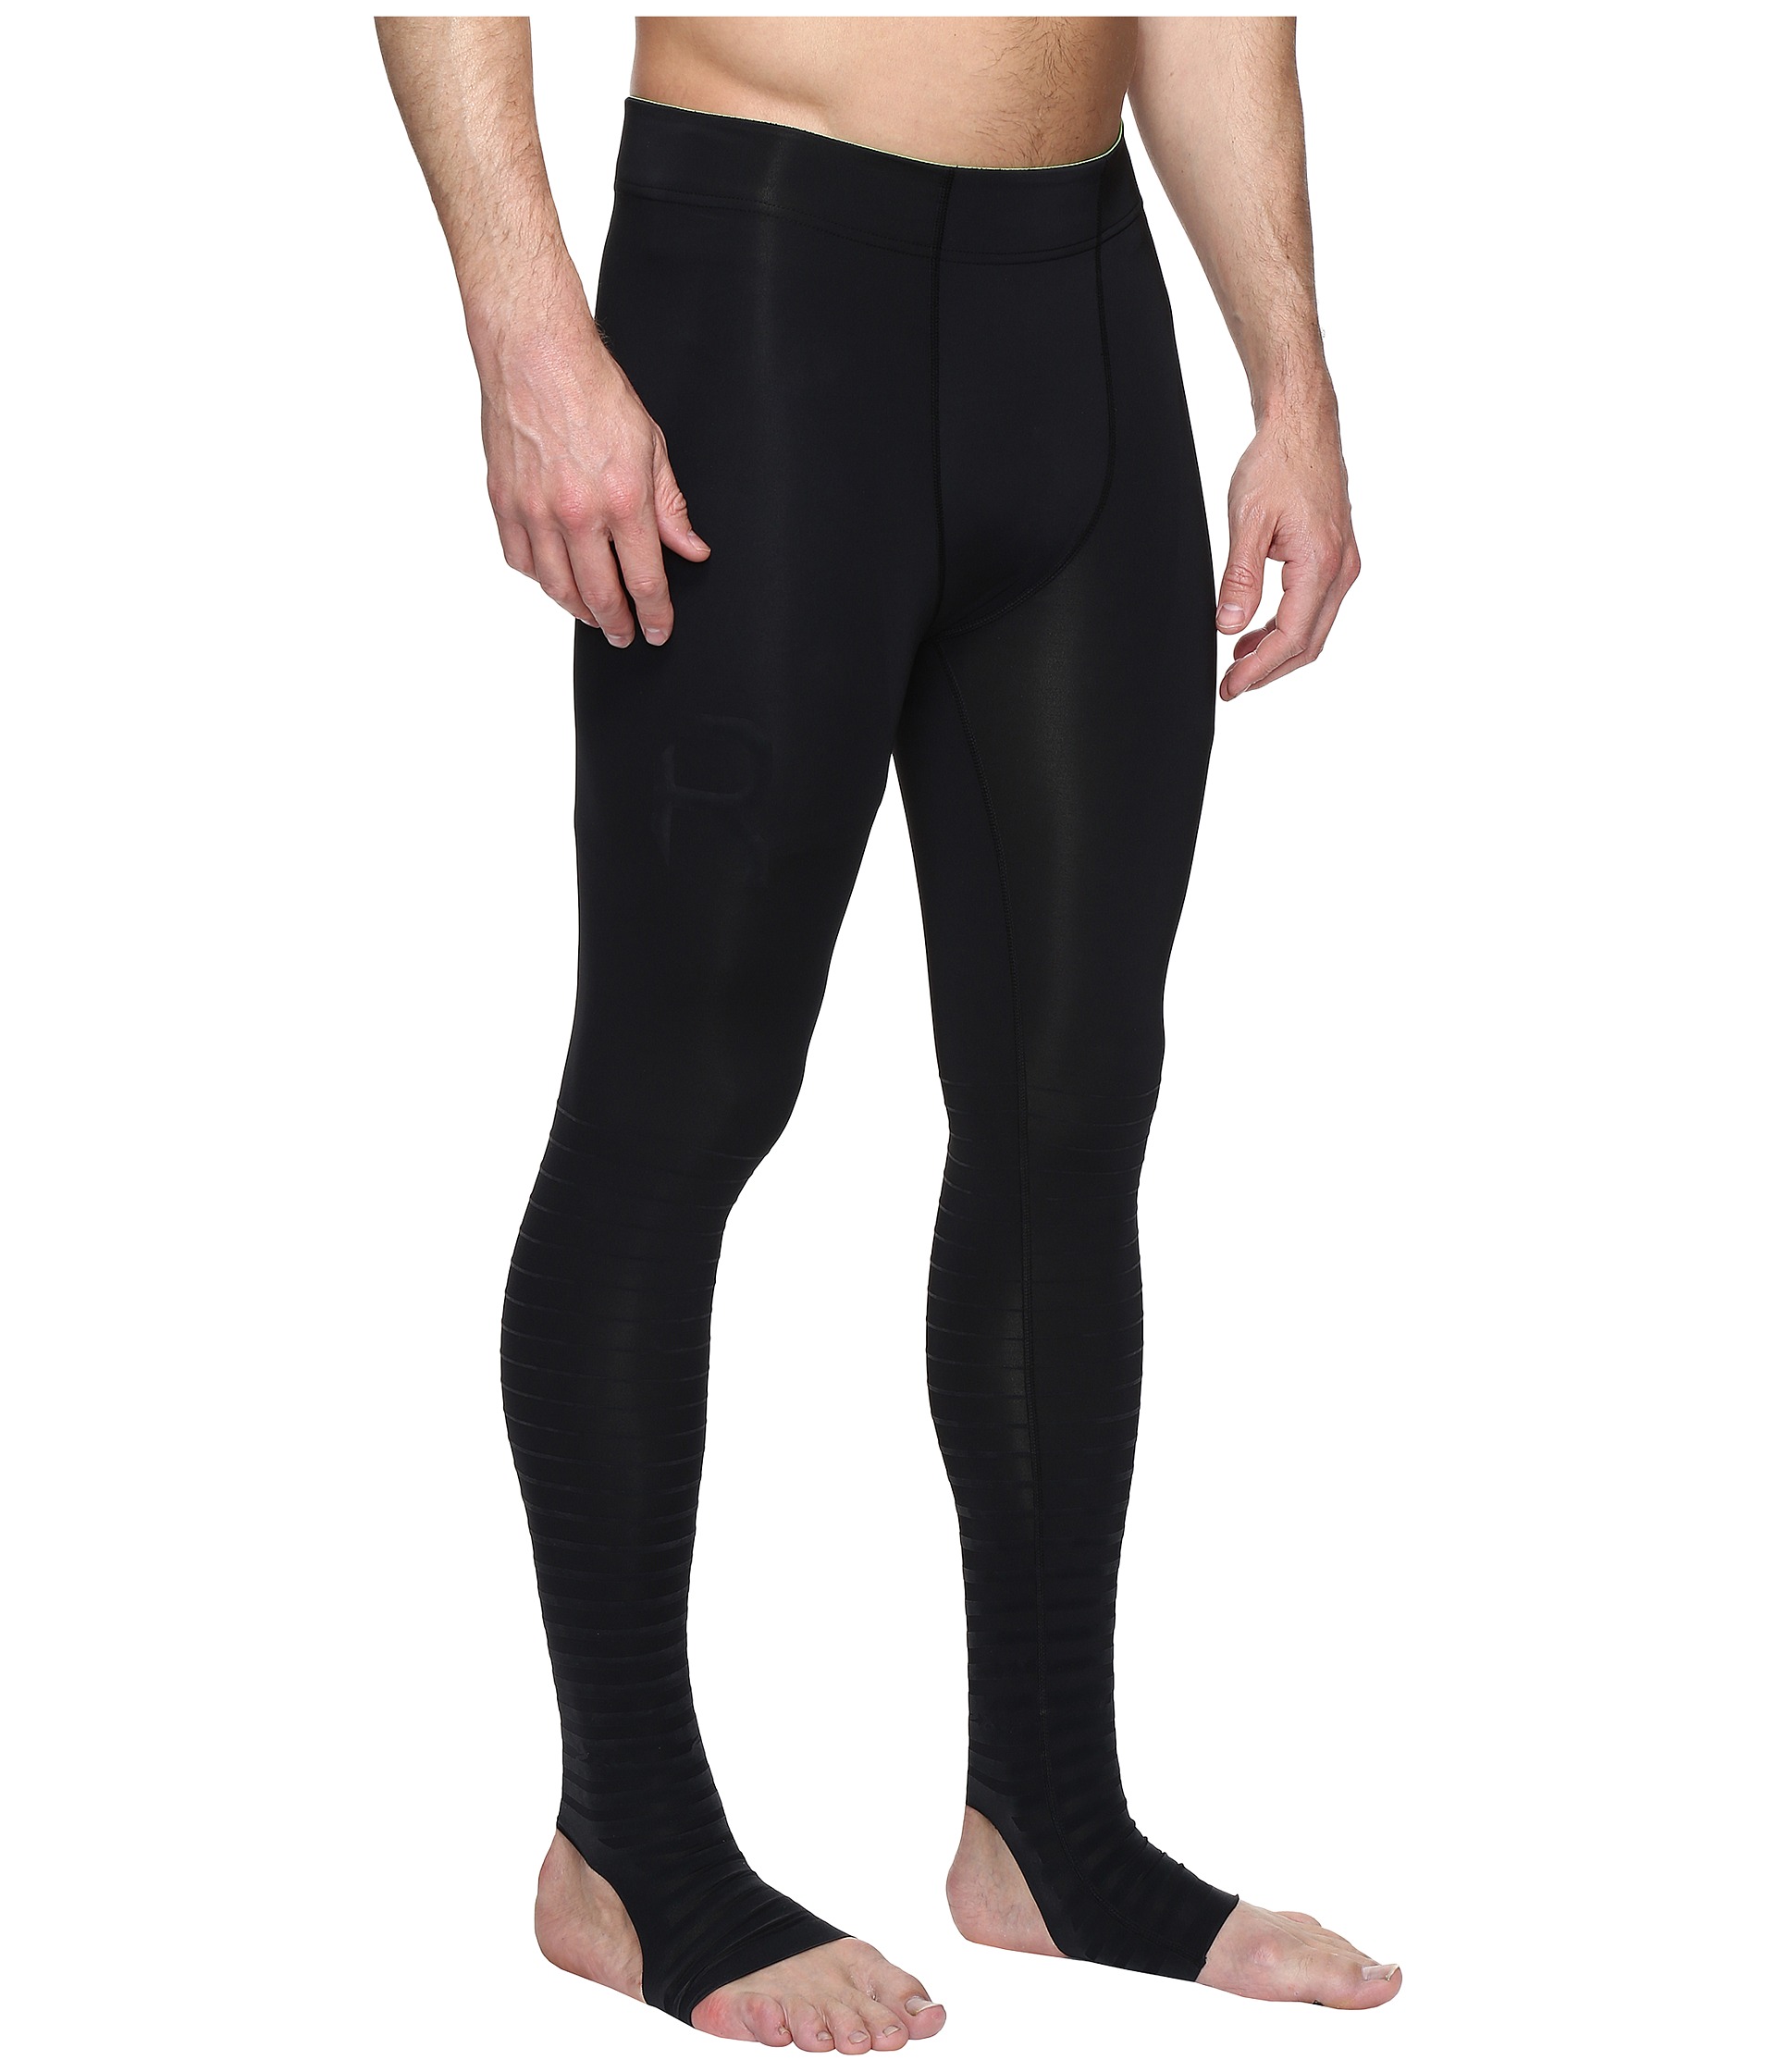 2XU ELITE Recovery Compression Tights at Zappos.com